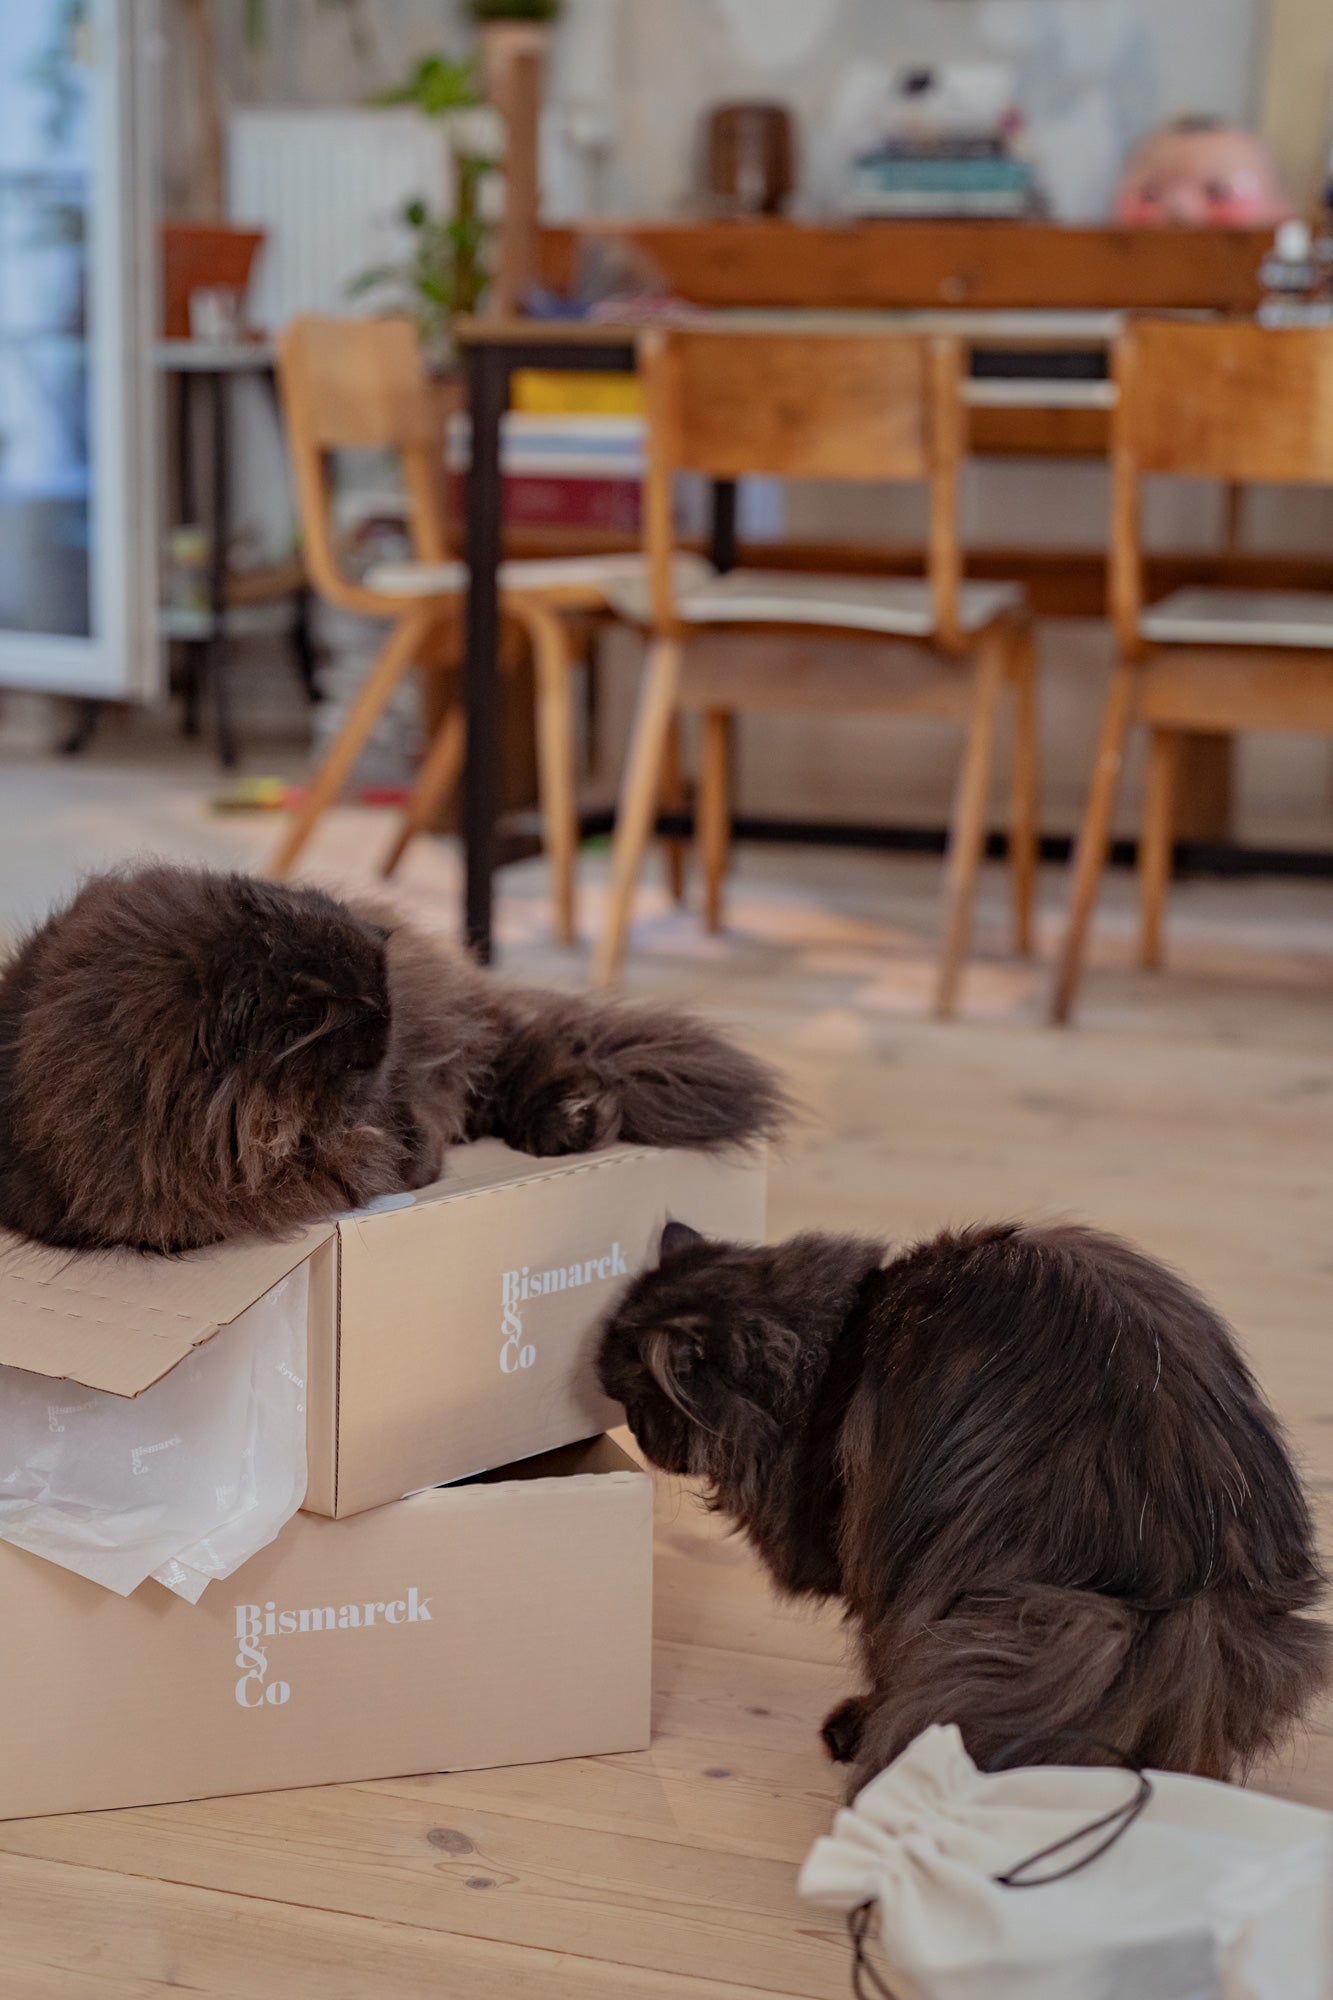 Cats on Bismarck boxes